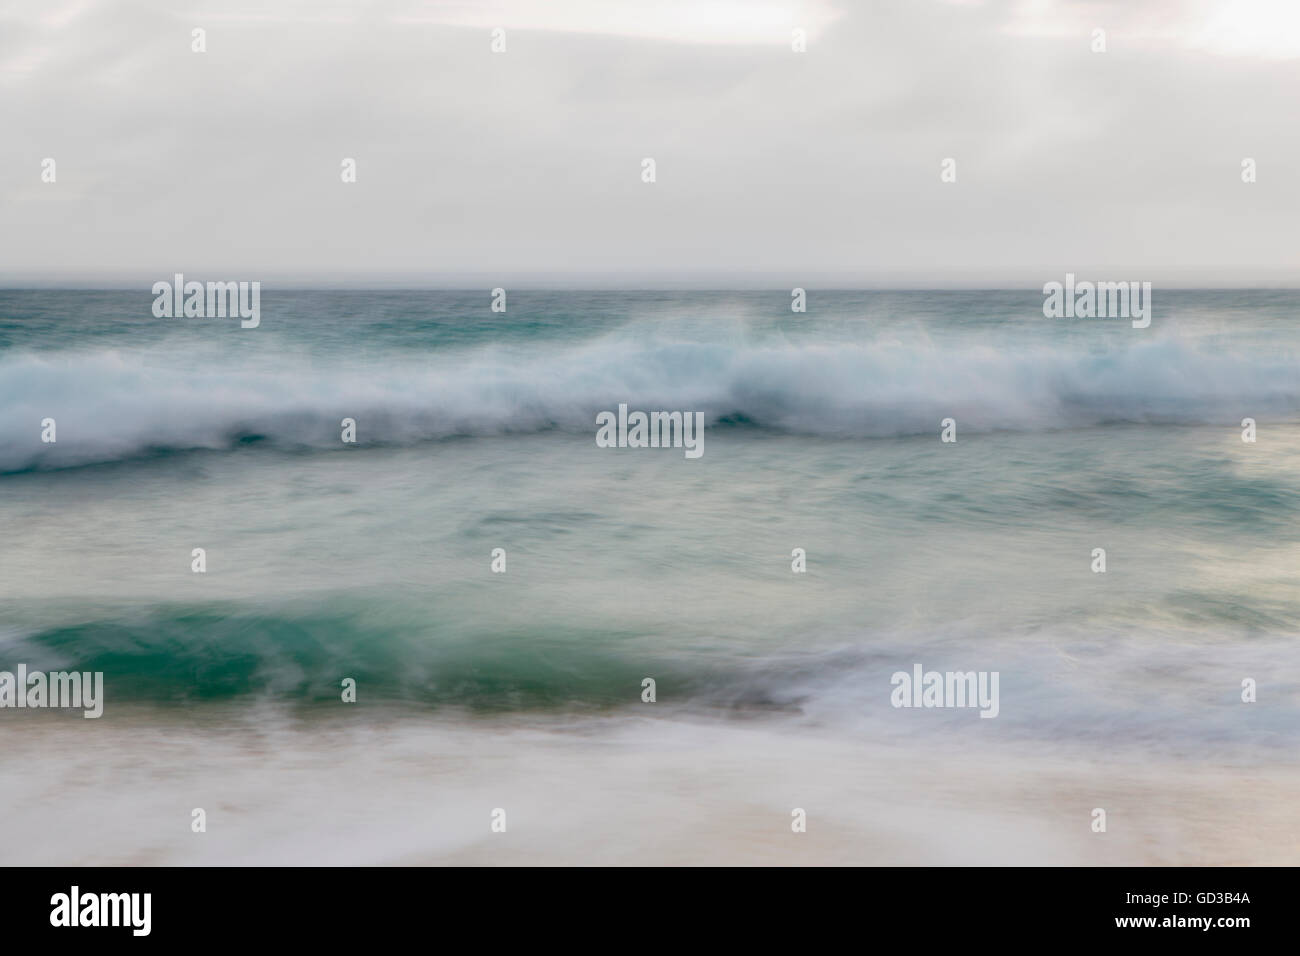 Breaking waves of ocean water and overcast sky. Stock Photo